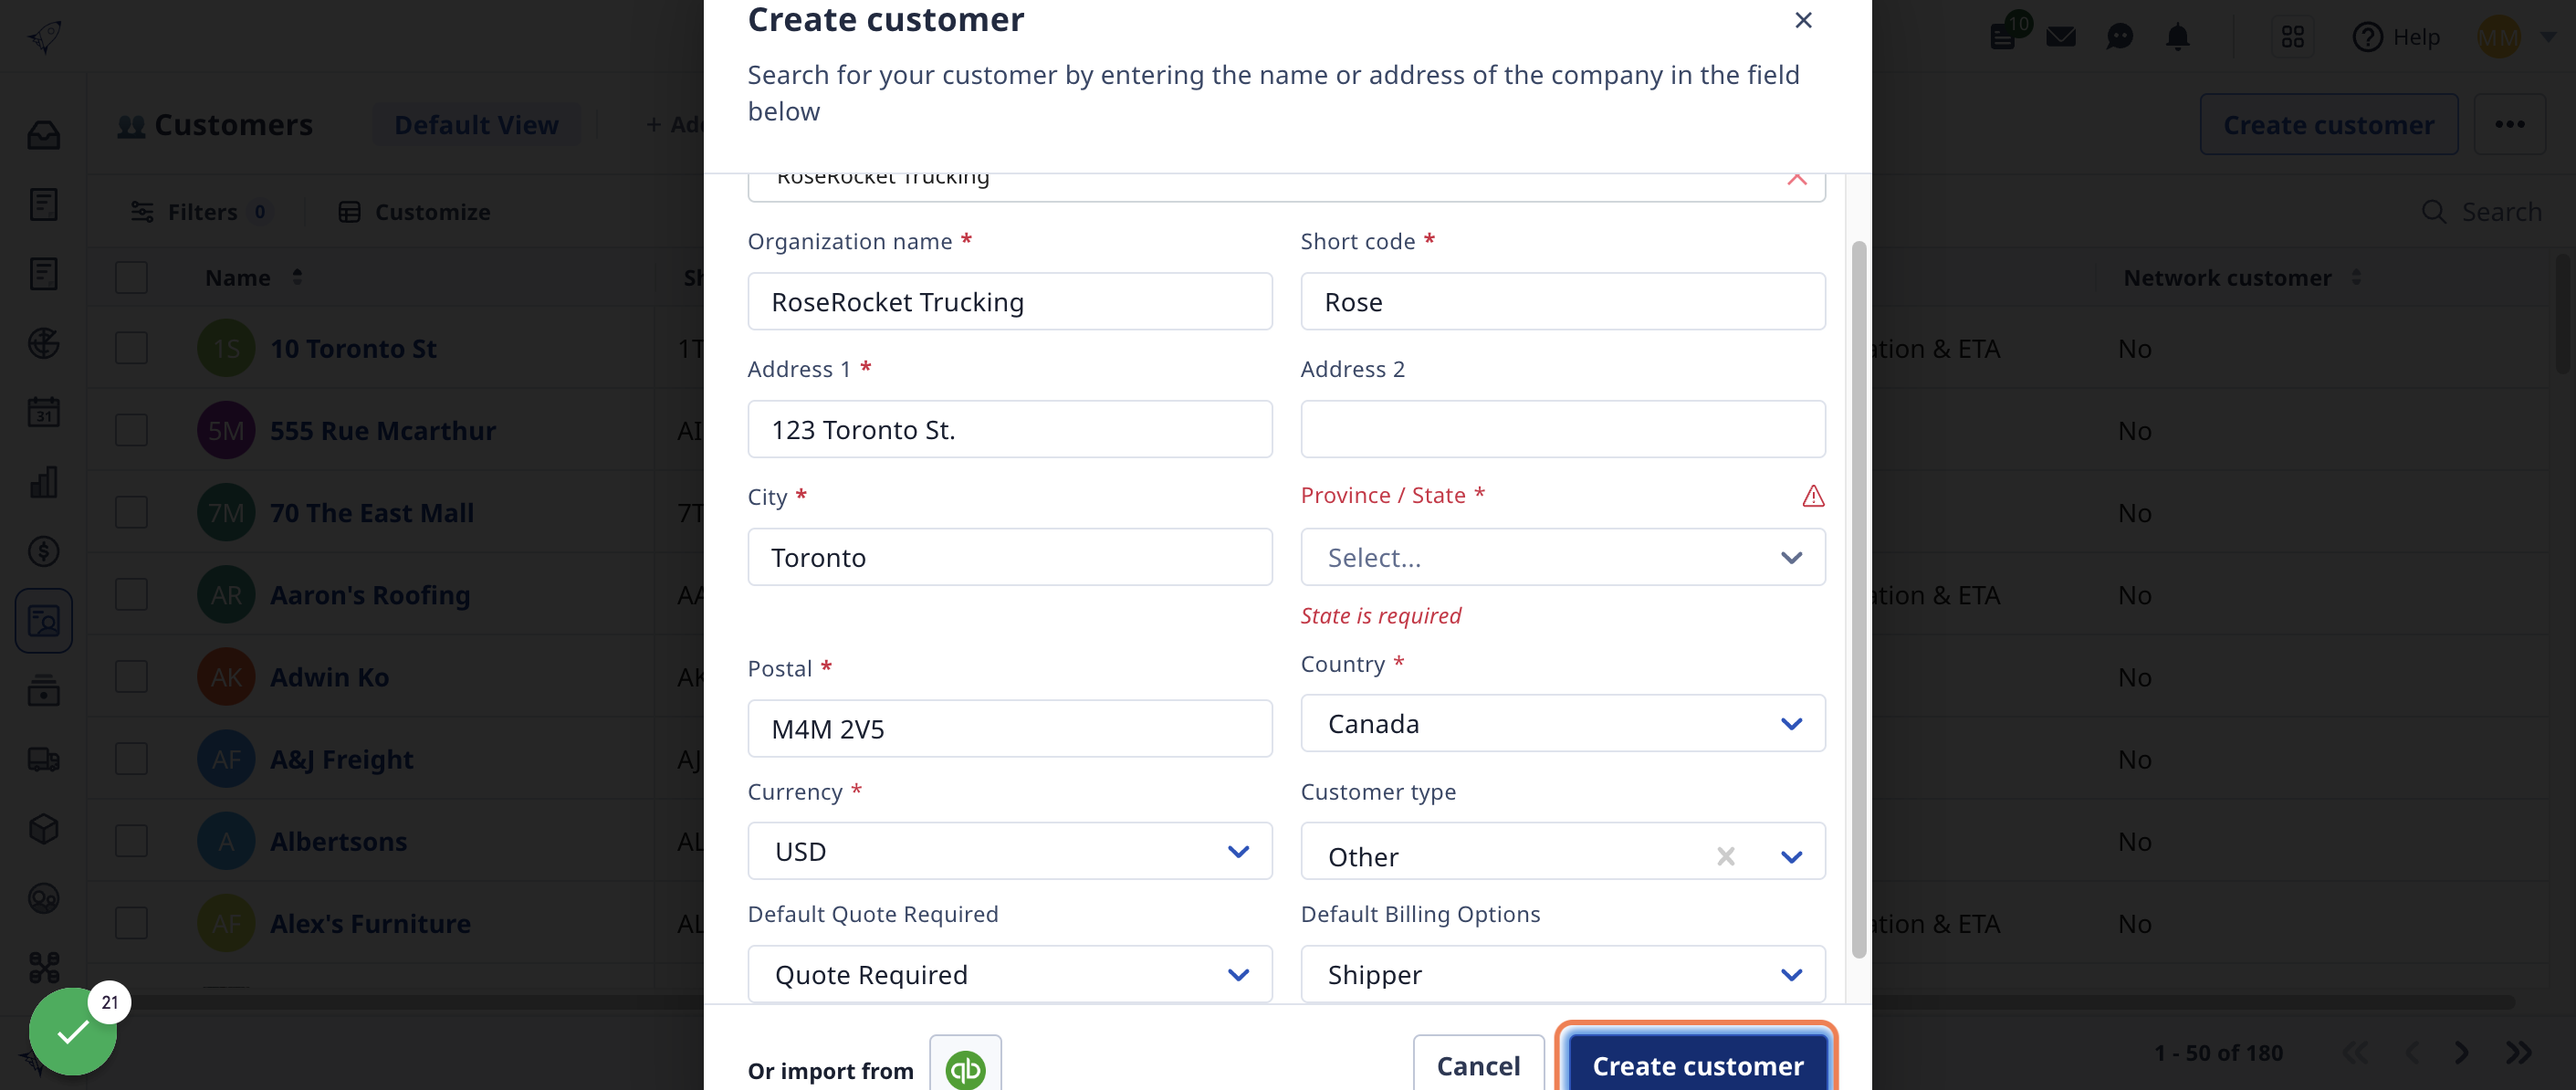  Once you have all your information entered, click 'Create customer' to save.